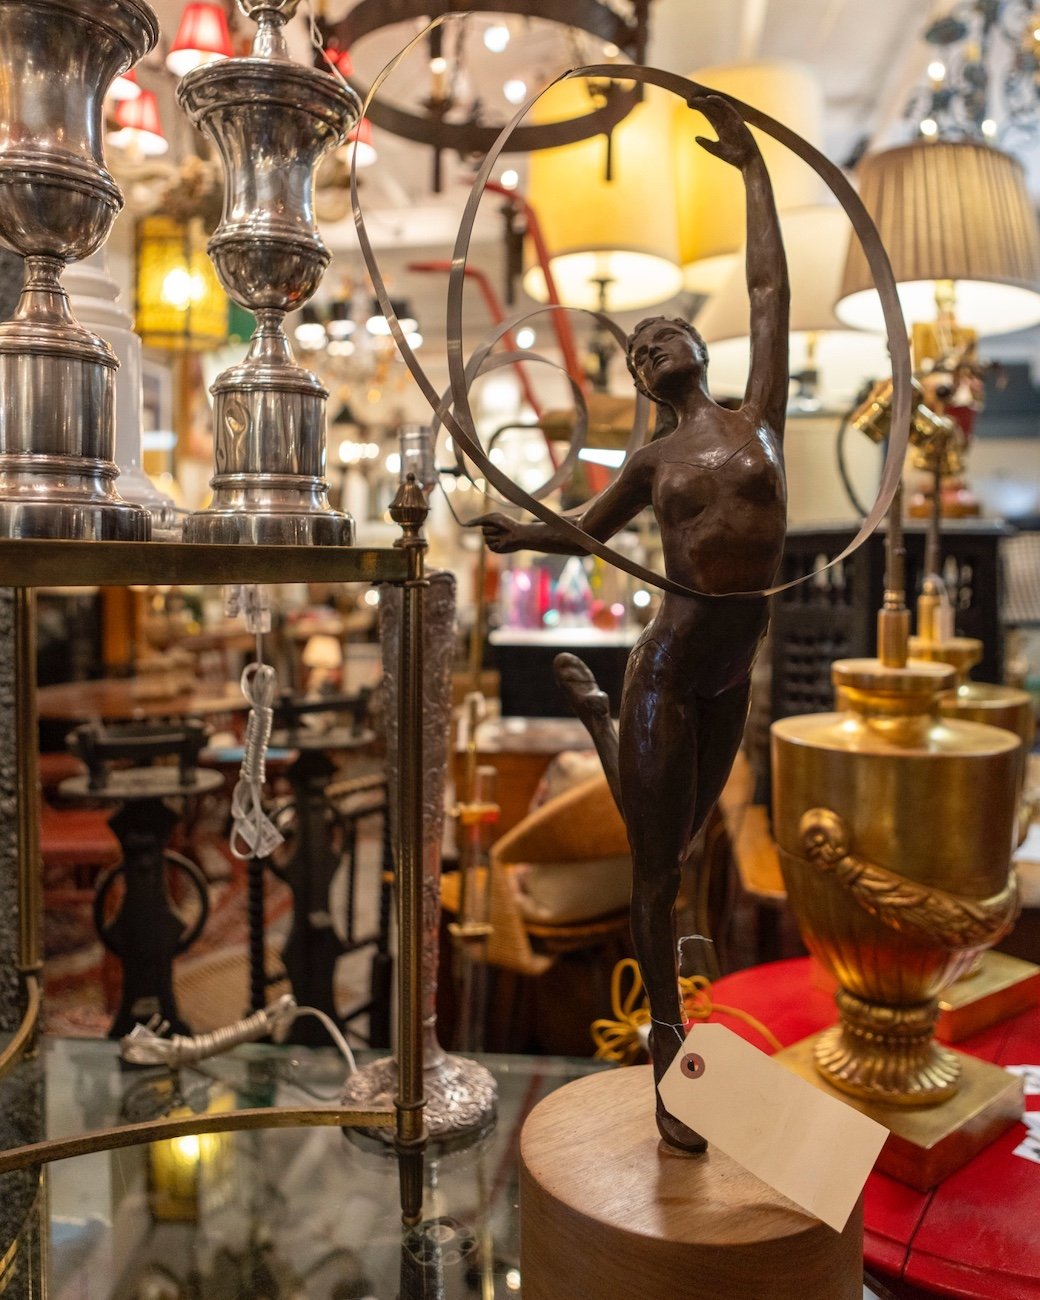 When you shop at #PasadenaAntiqueCenter &amp; Annex you have access to free parking and air conditioning while you browse our #antiques! 🌬️⠀
⠀
If you haven&rsquo;t been in to see us in a while, our vendors are always getting in new items. Visit us e